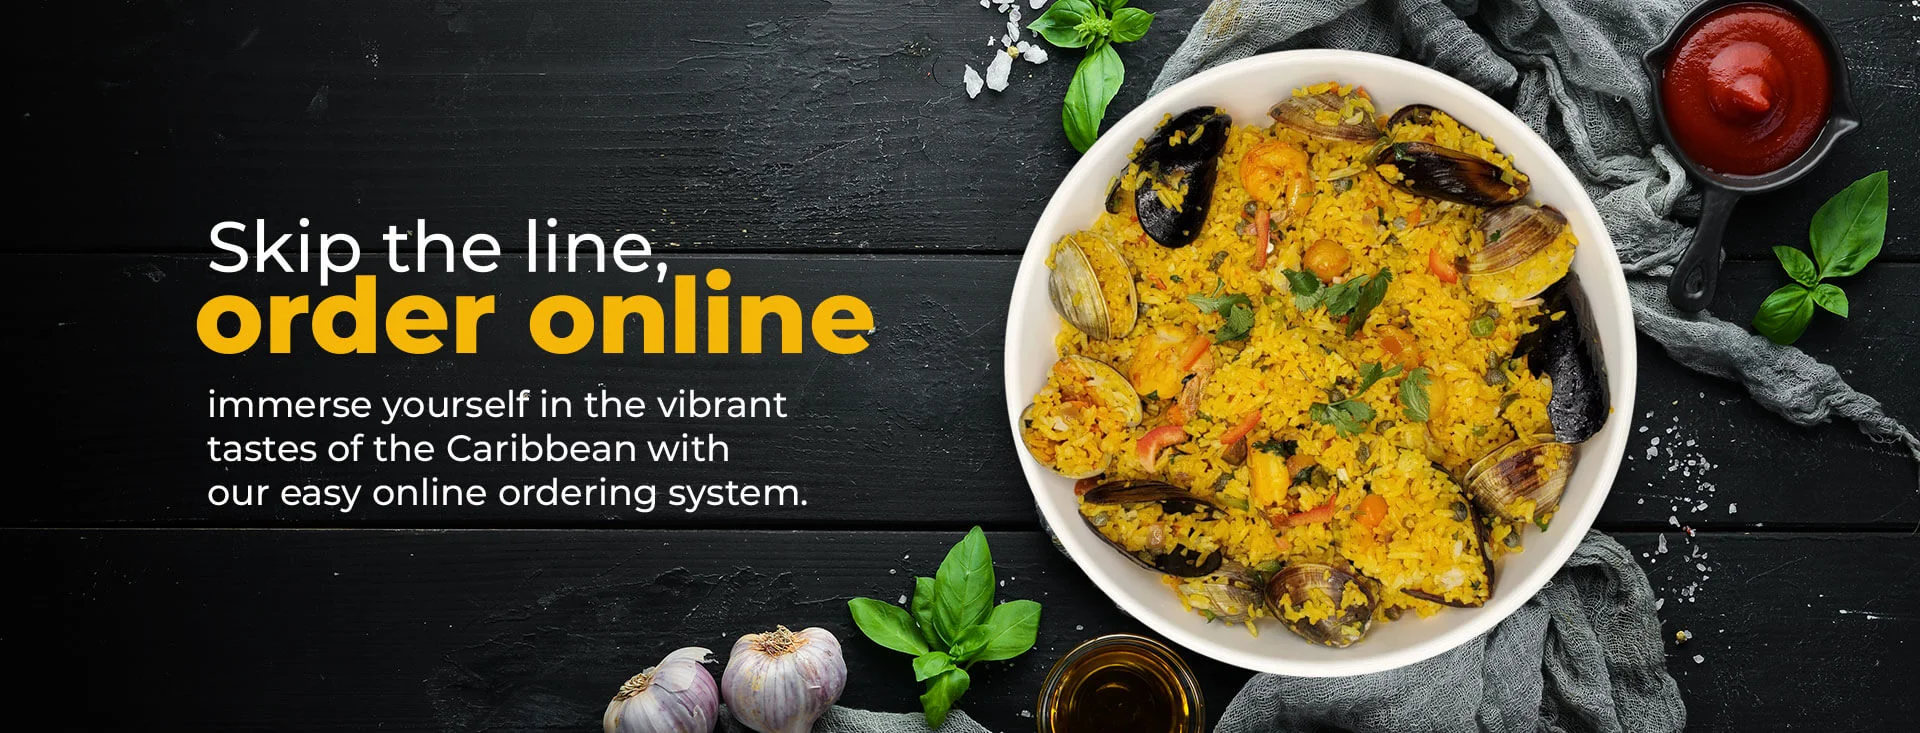 Plate with mussels and a lemon. Title says: Convenience meets flavor. Order your favorite dishes online and savor the taste of the islands at home.